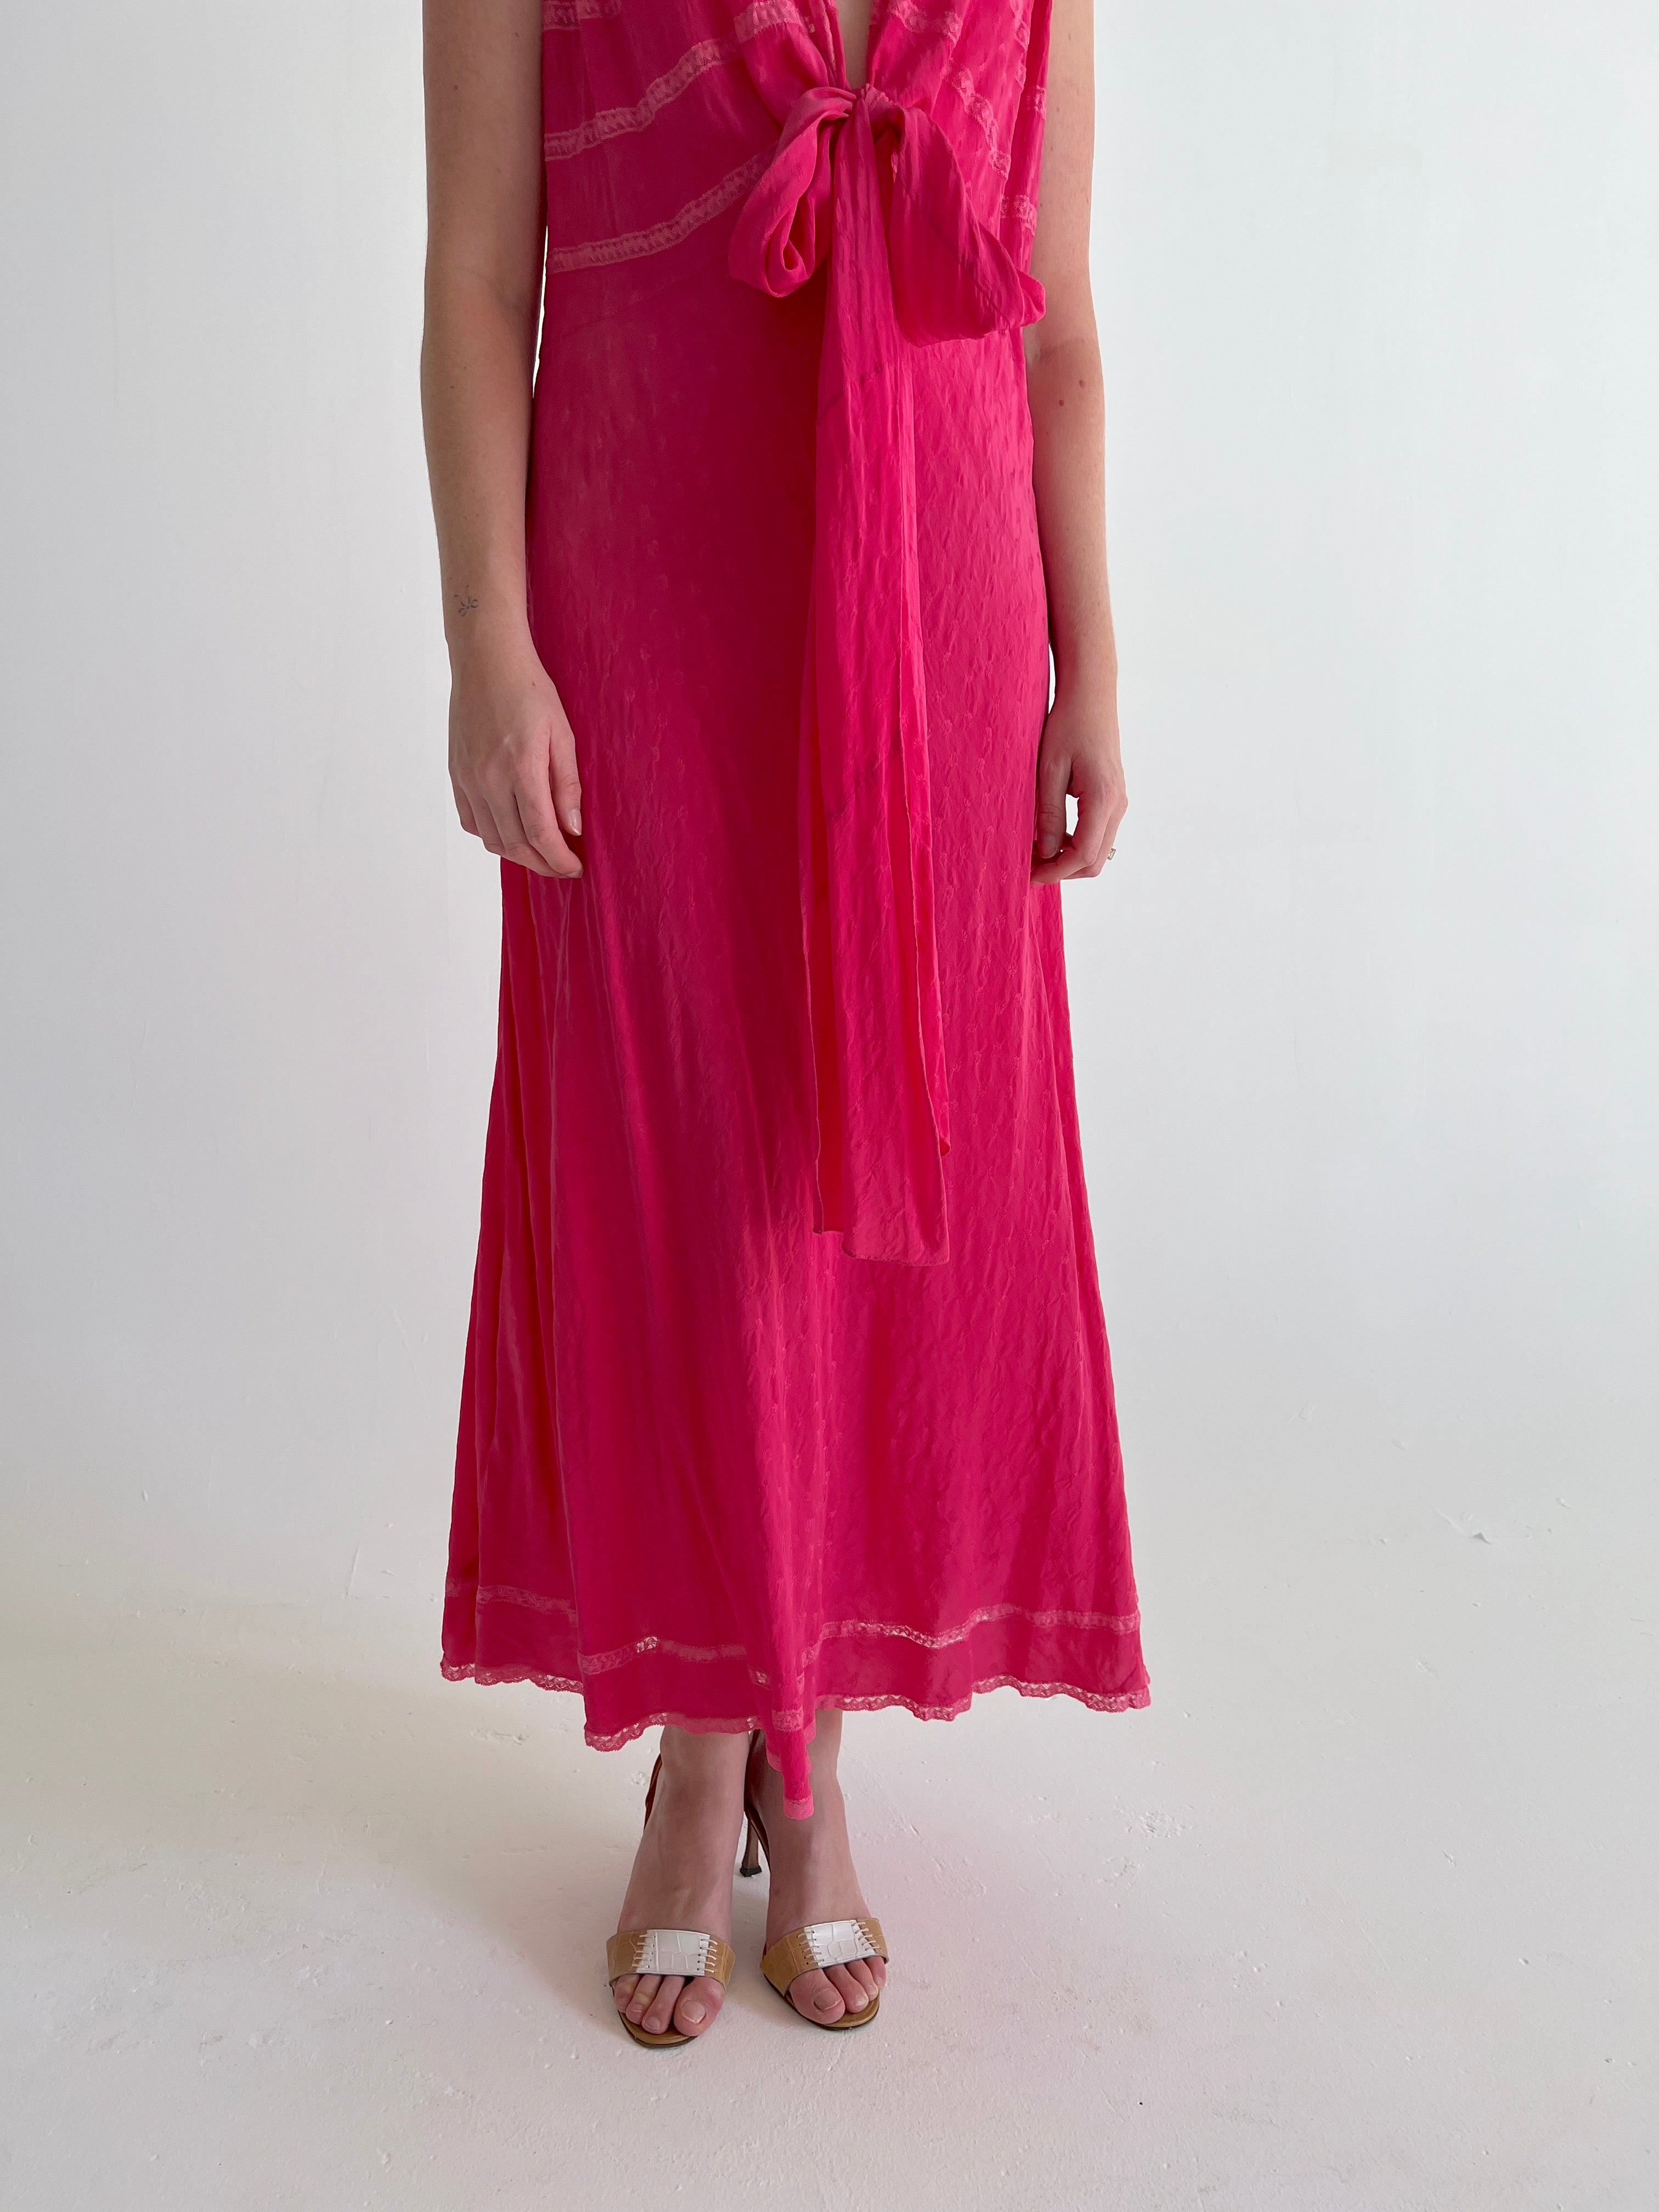 Hand Dyed Hot Pink Silk Dress with Tie